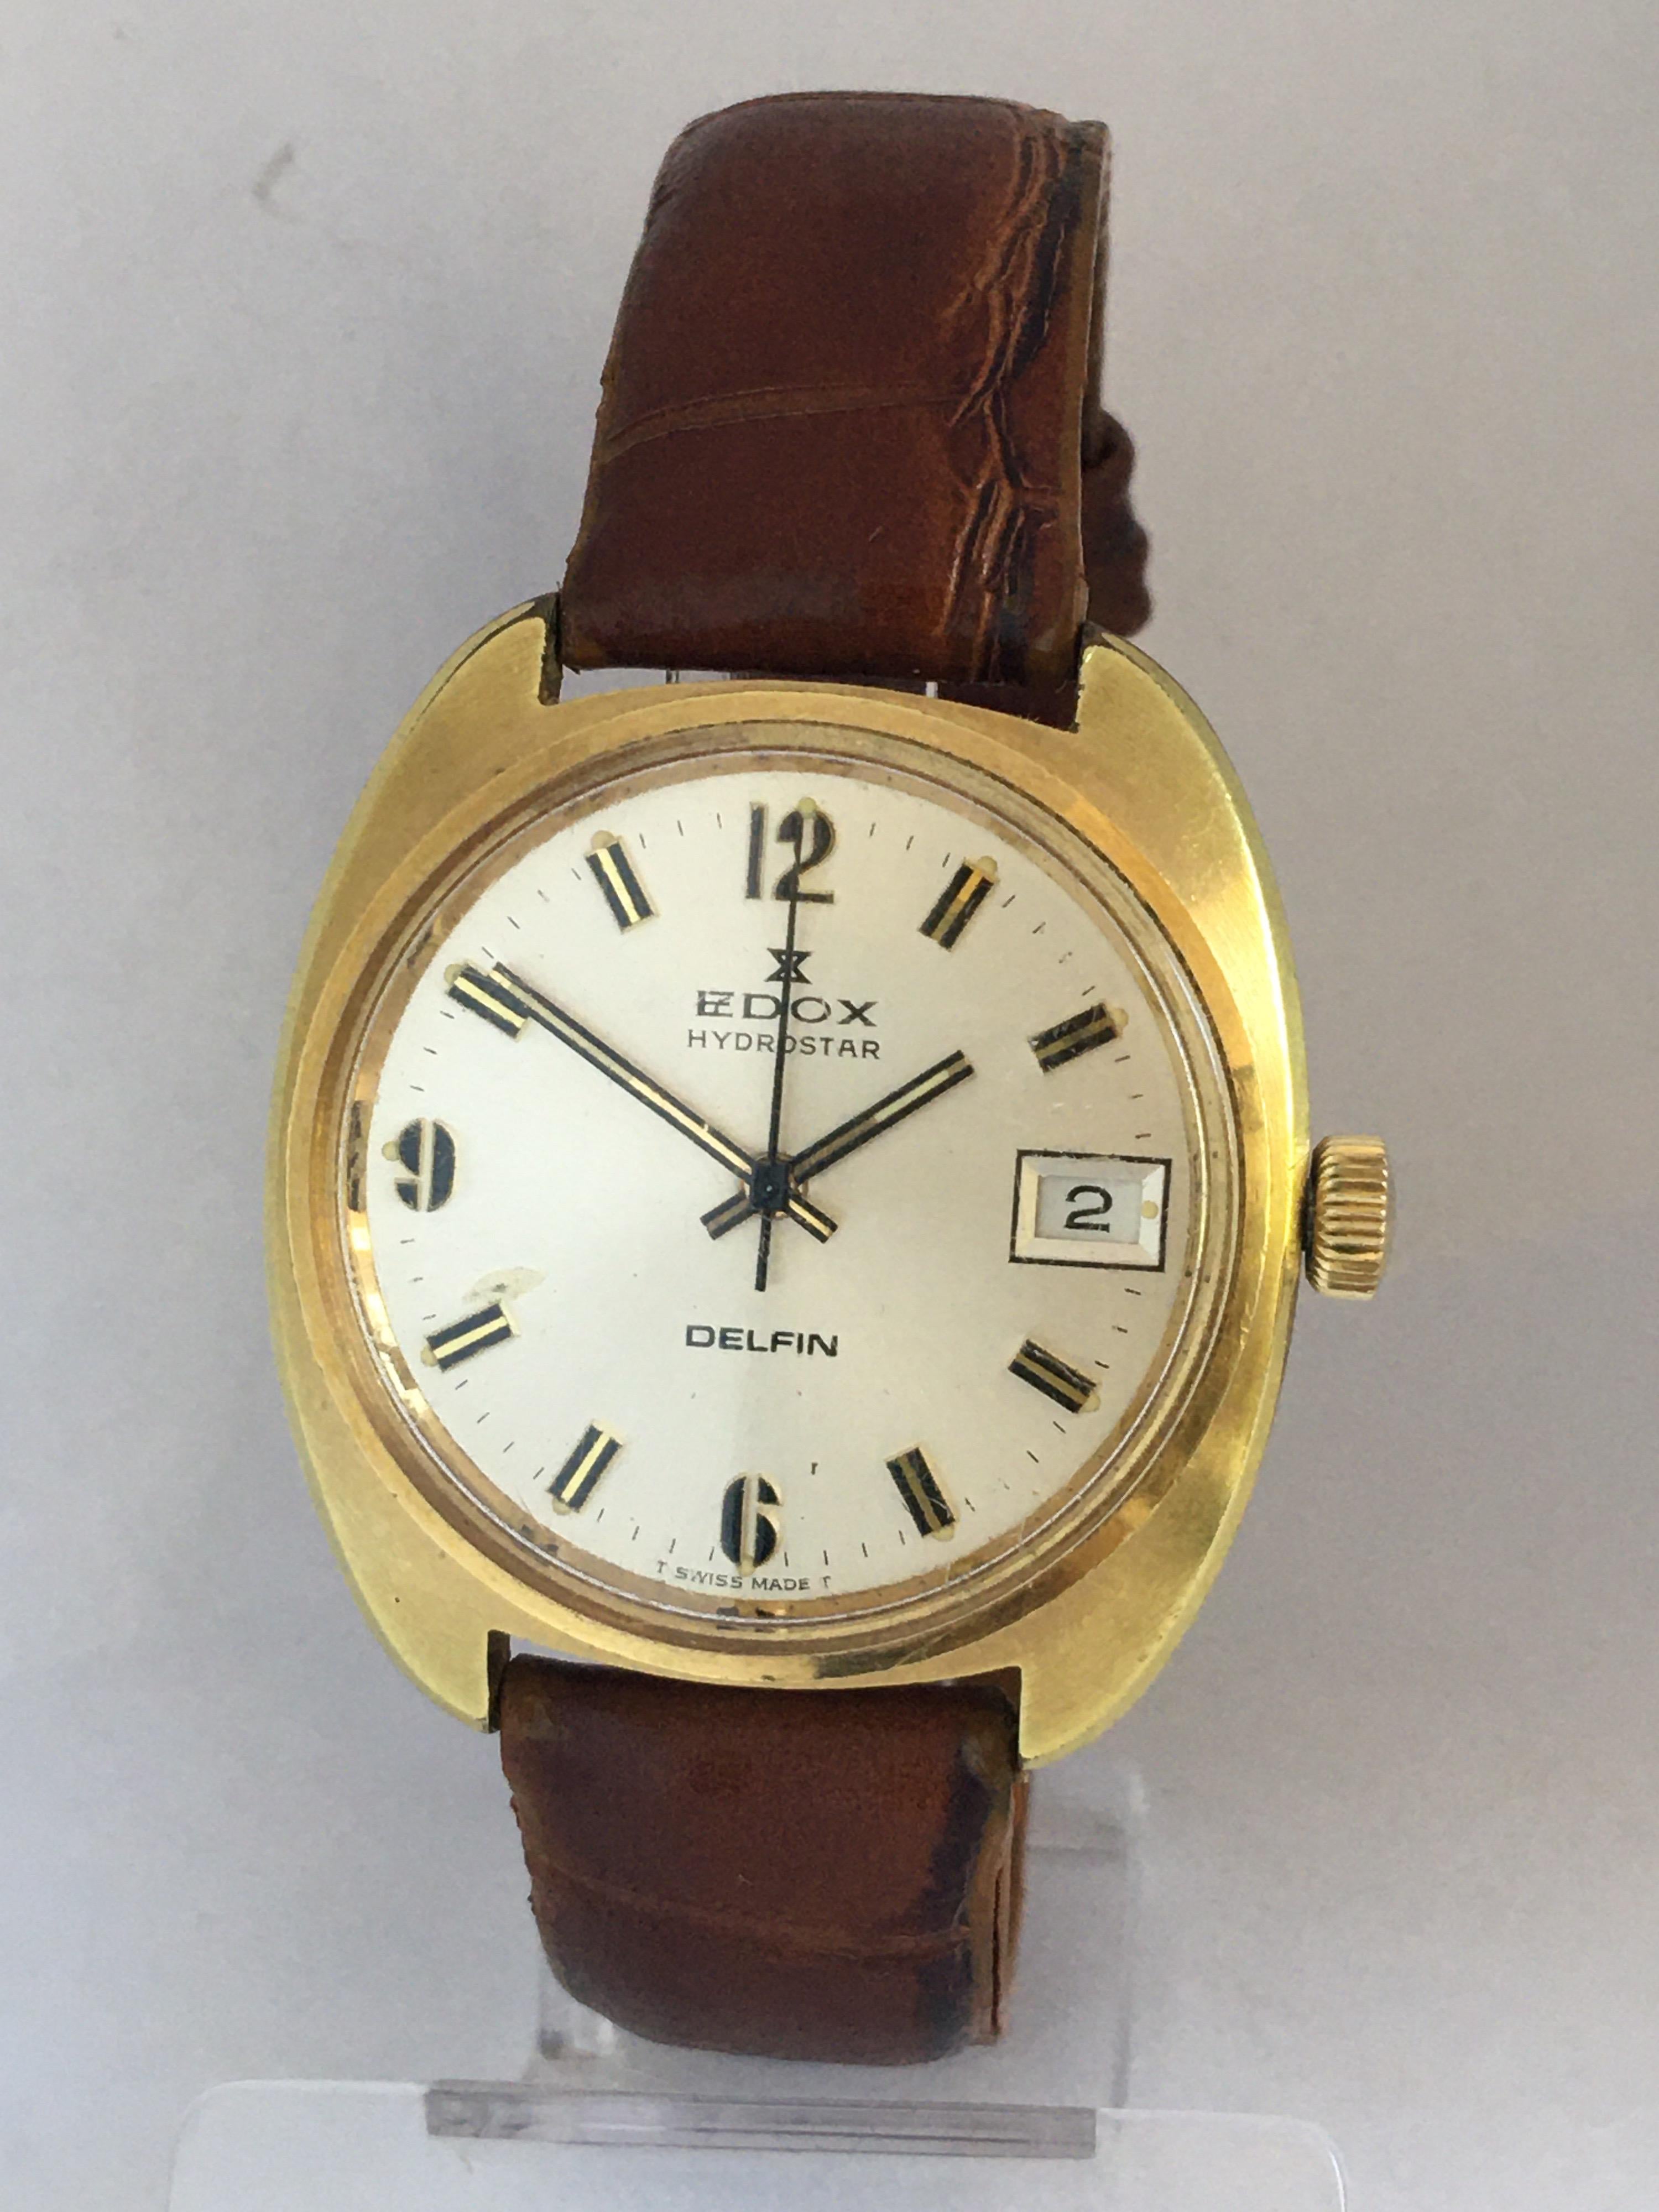 Gold Filled Vintage 1970s Edox Hydrostar Delfin Mechanical Watch For ...